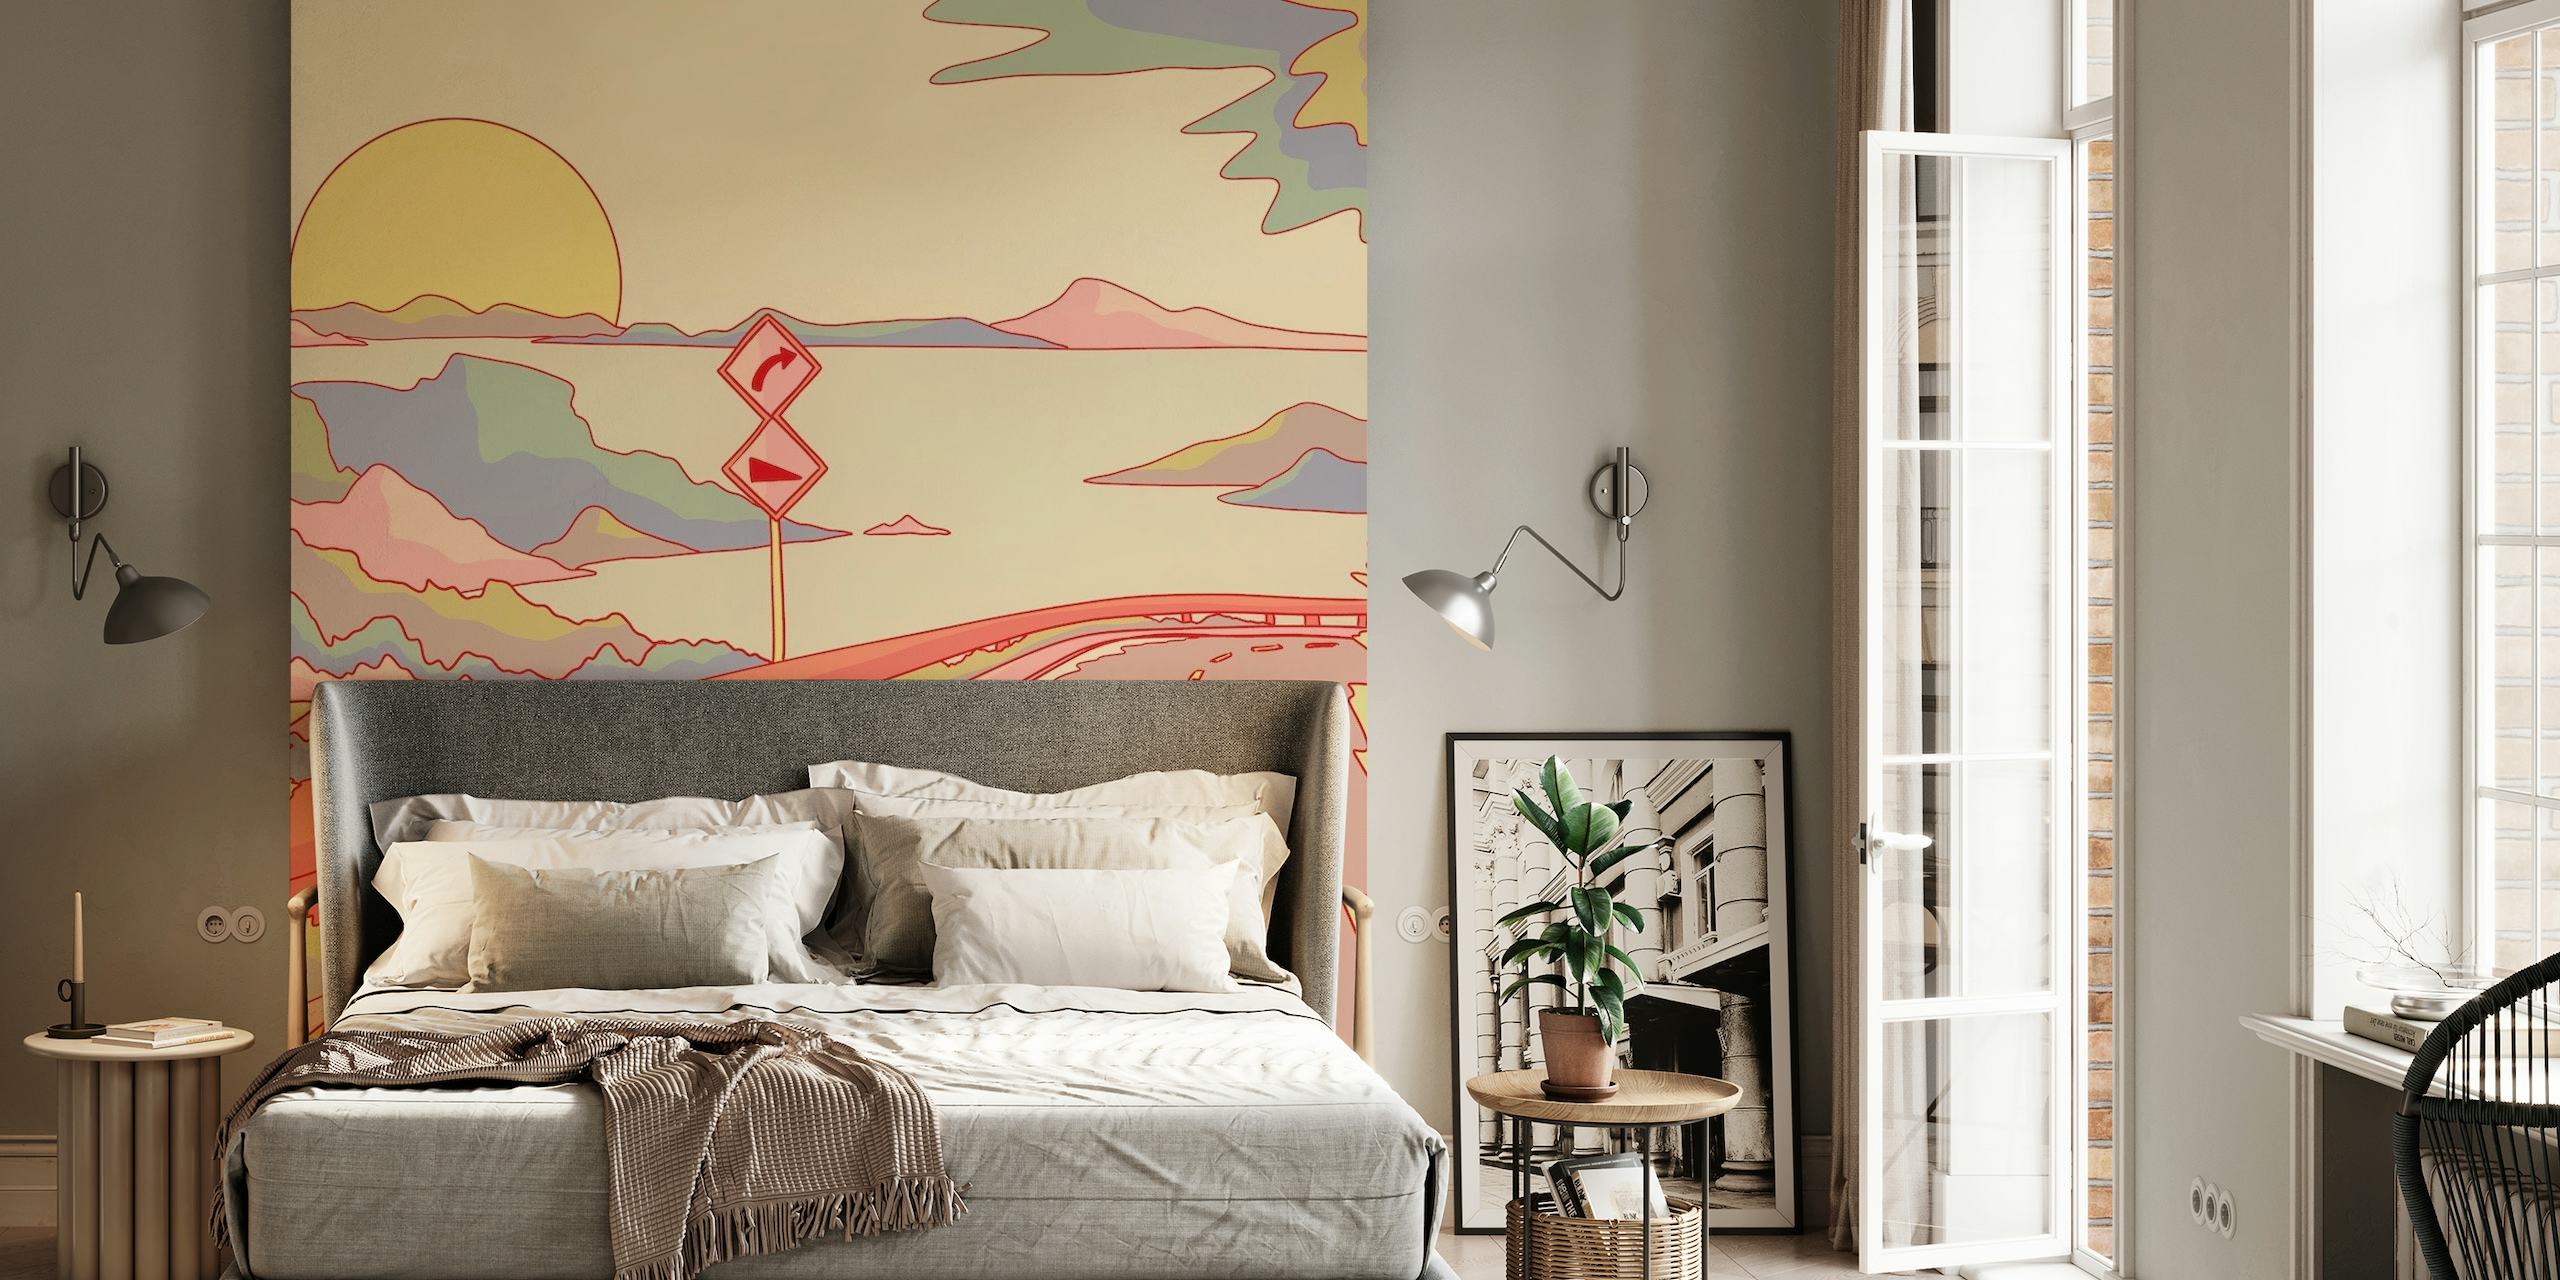 Aesthetic wall mural depicting a sunset road trip on a coastal island road with soft pastel colors